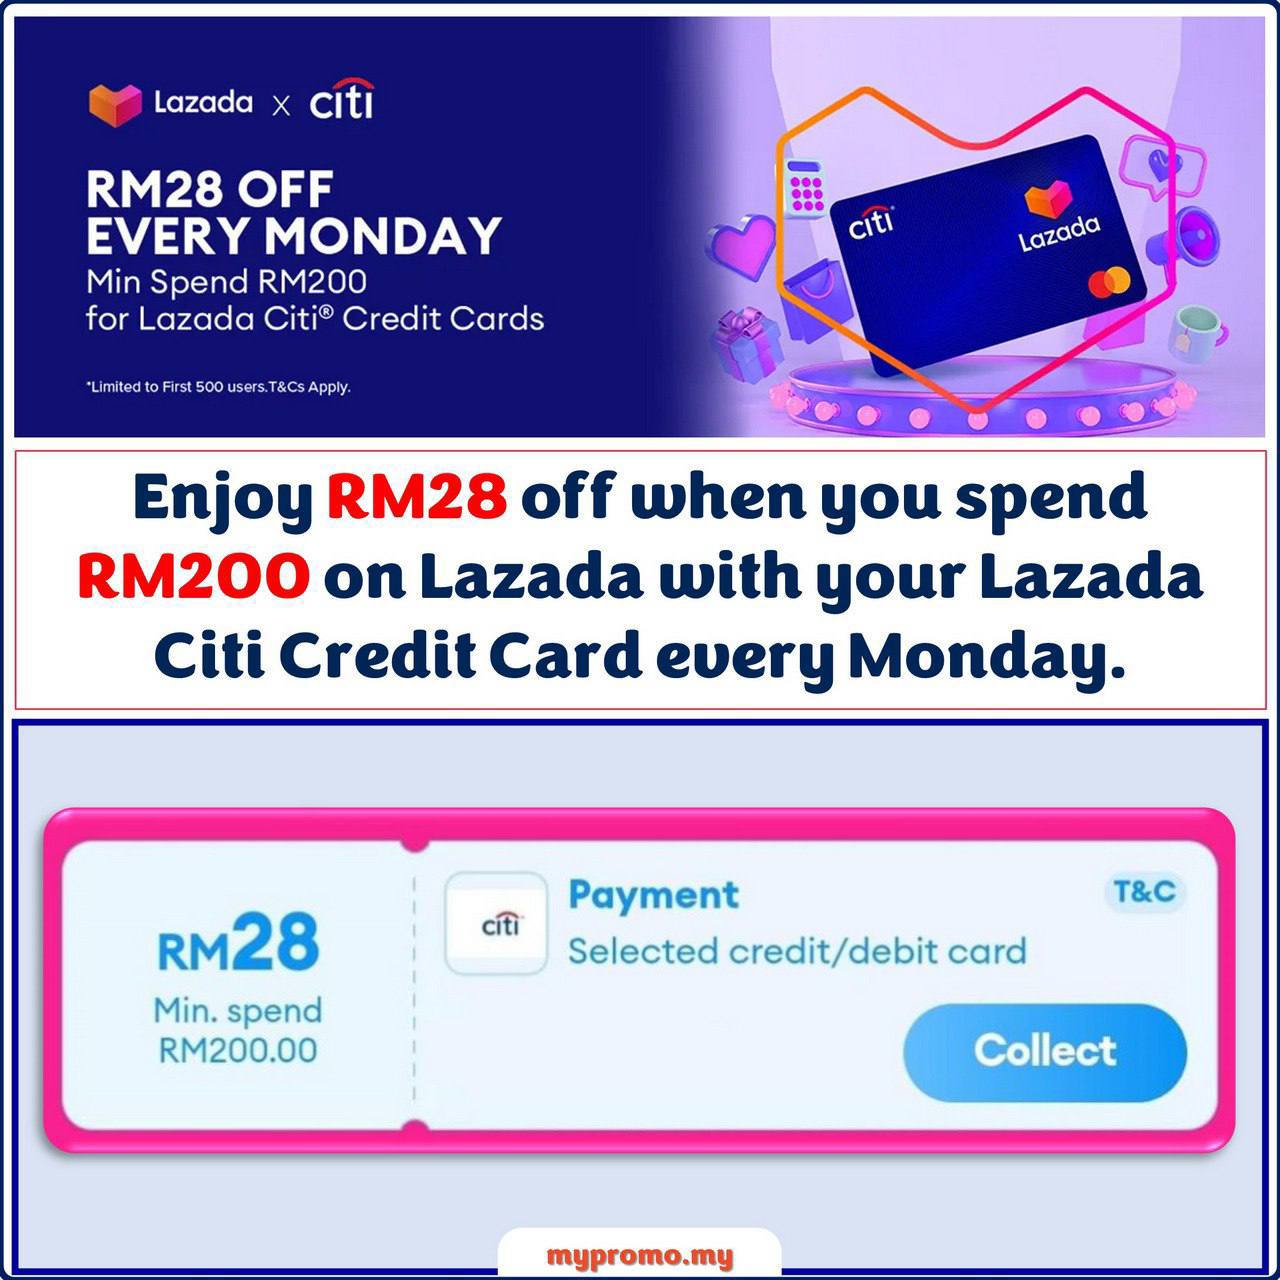 Lazada Citi Card Voucher RM28 Off on Every Monday